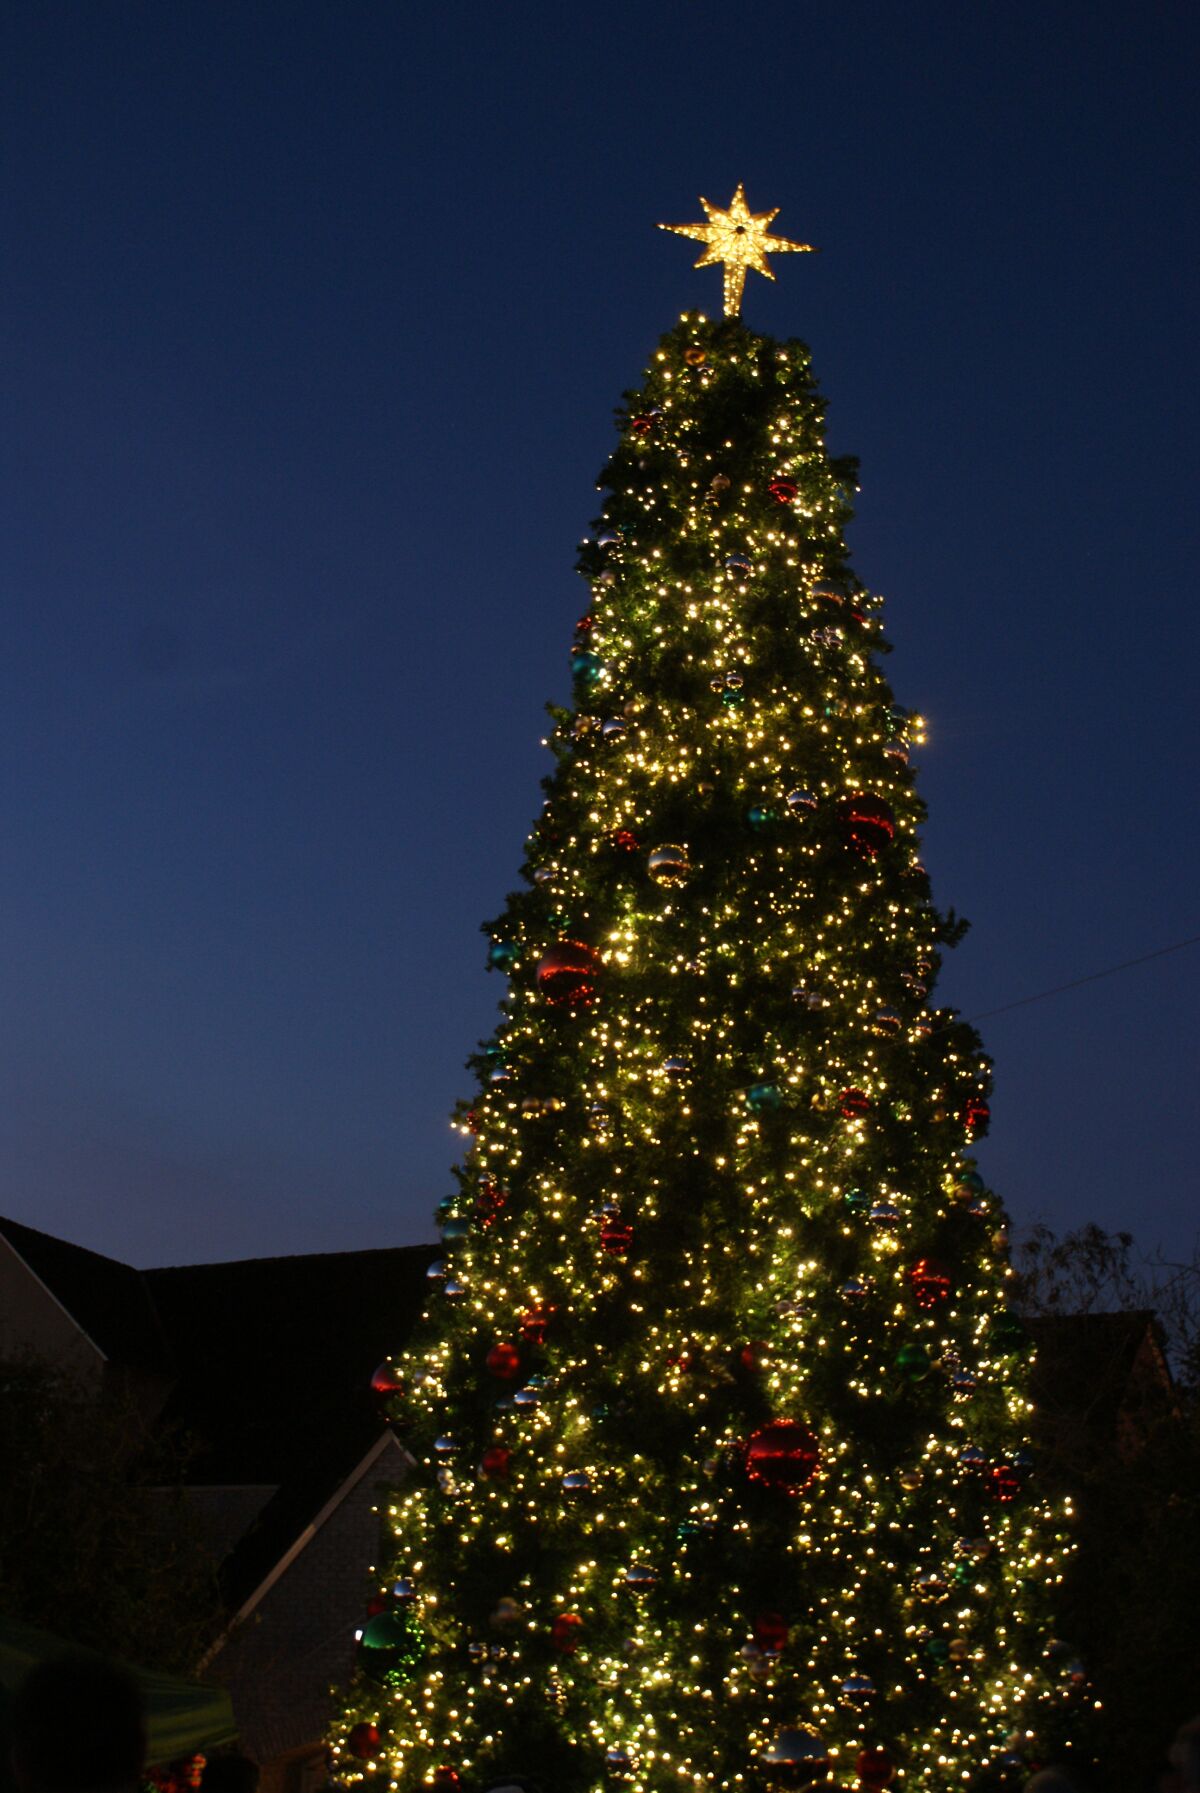 The holiday tree lit up at the Jim Watkins Amphitheater at L’Auberge Del Mar.